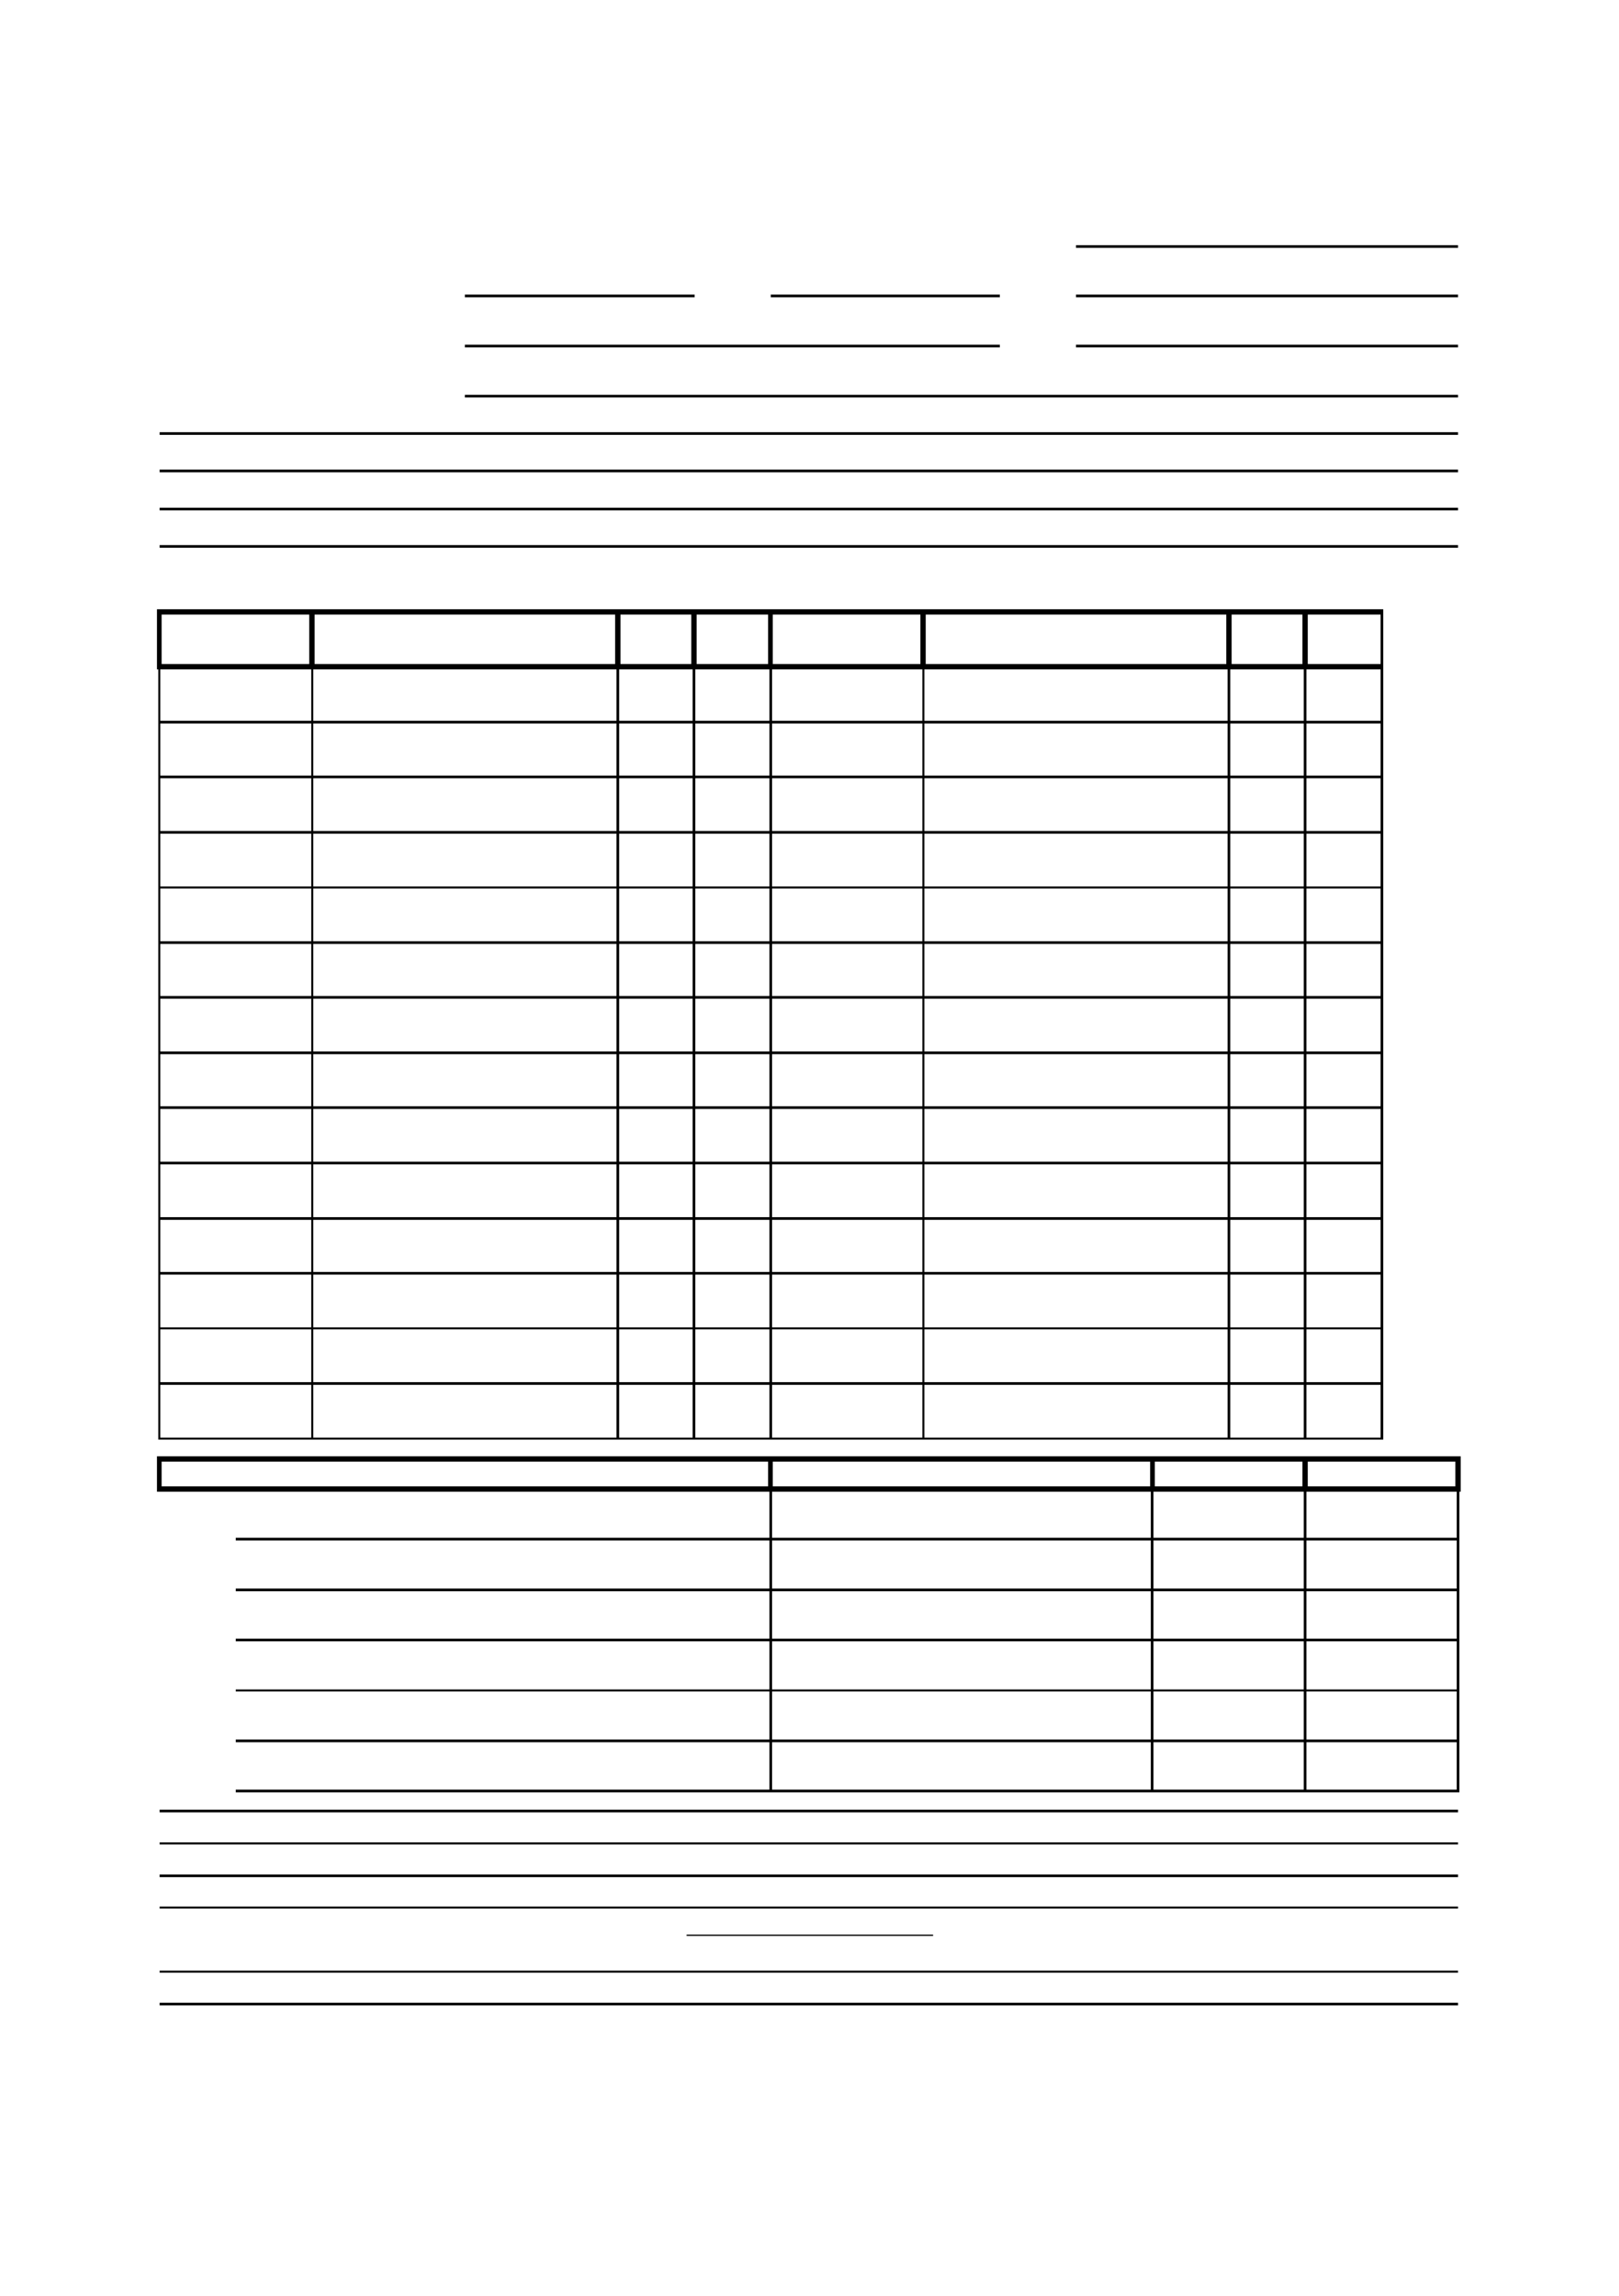 Film Call Sheet Template Free Download Intended For Film Call Sheet Template Word